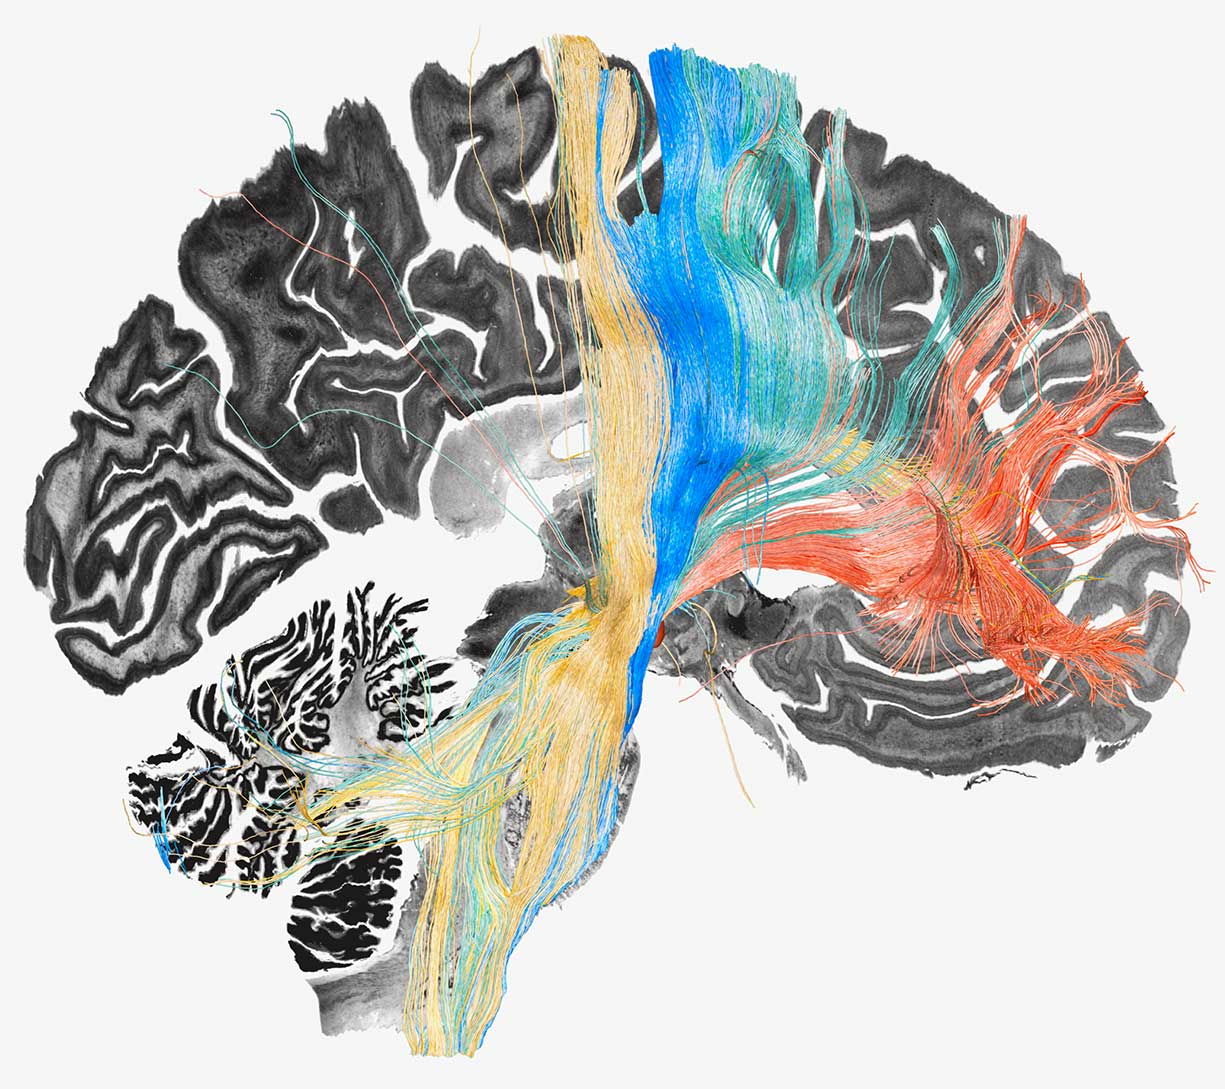 A side view of a brain with colored fiber bundles showing the connections between the frontal cortex and the basal ganglia.